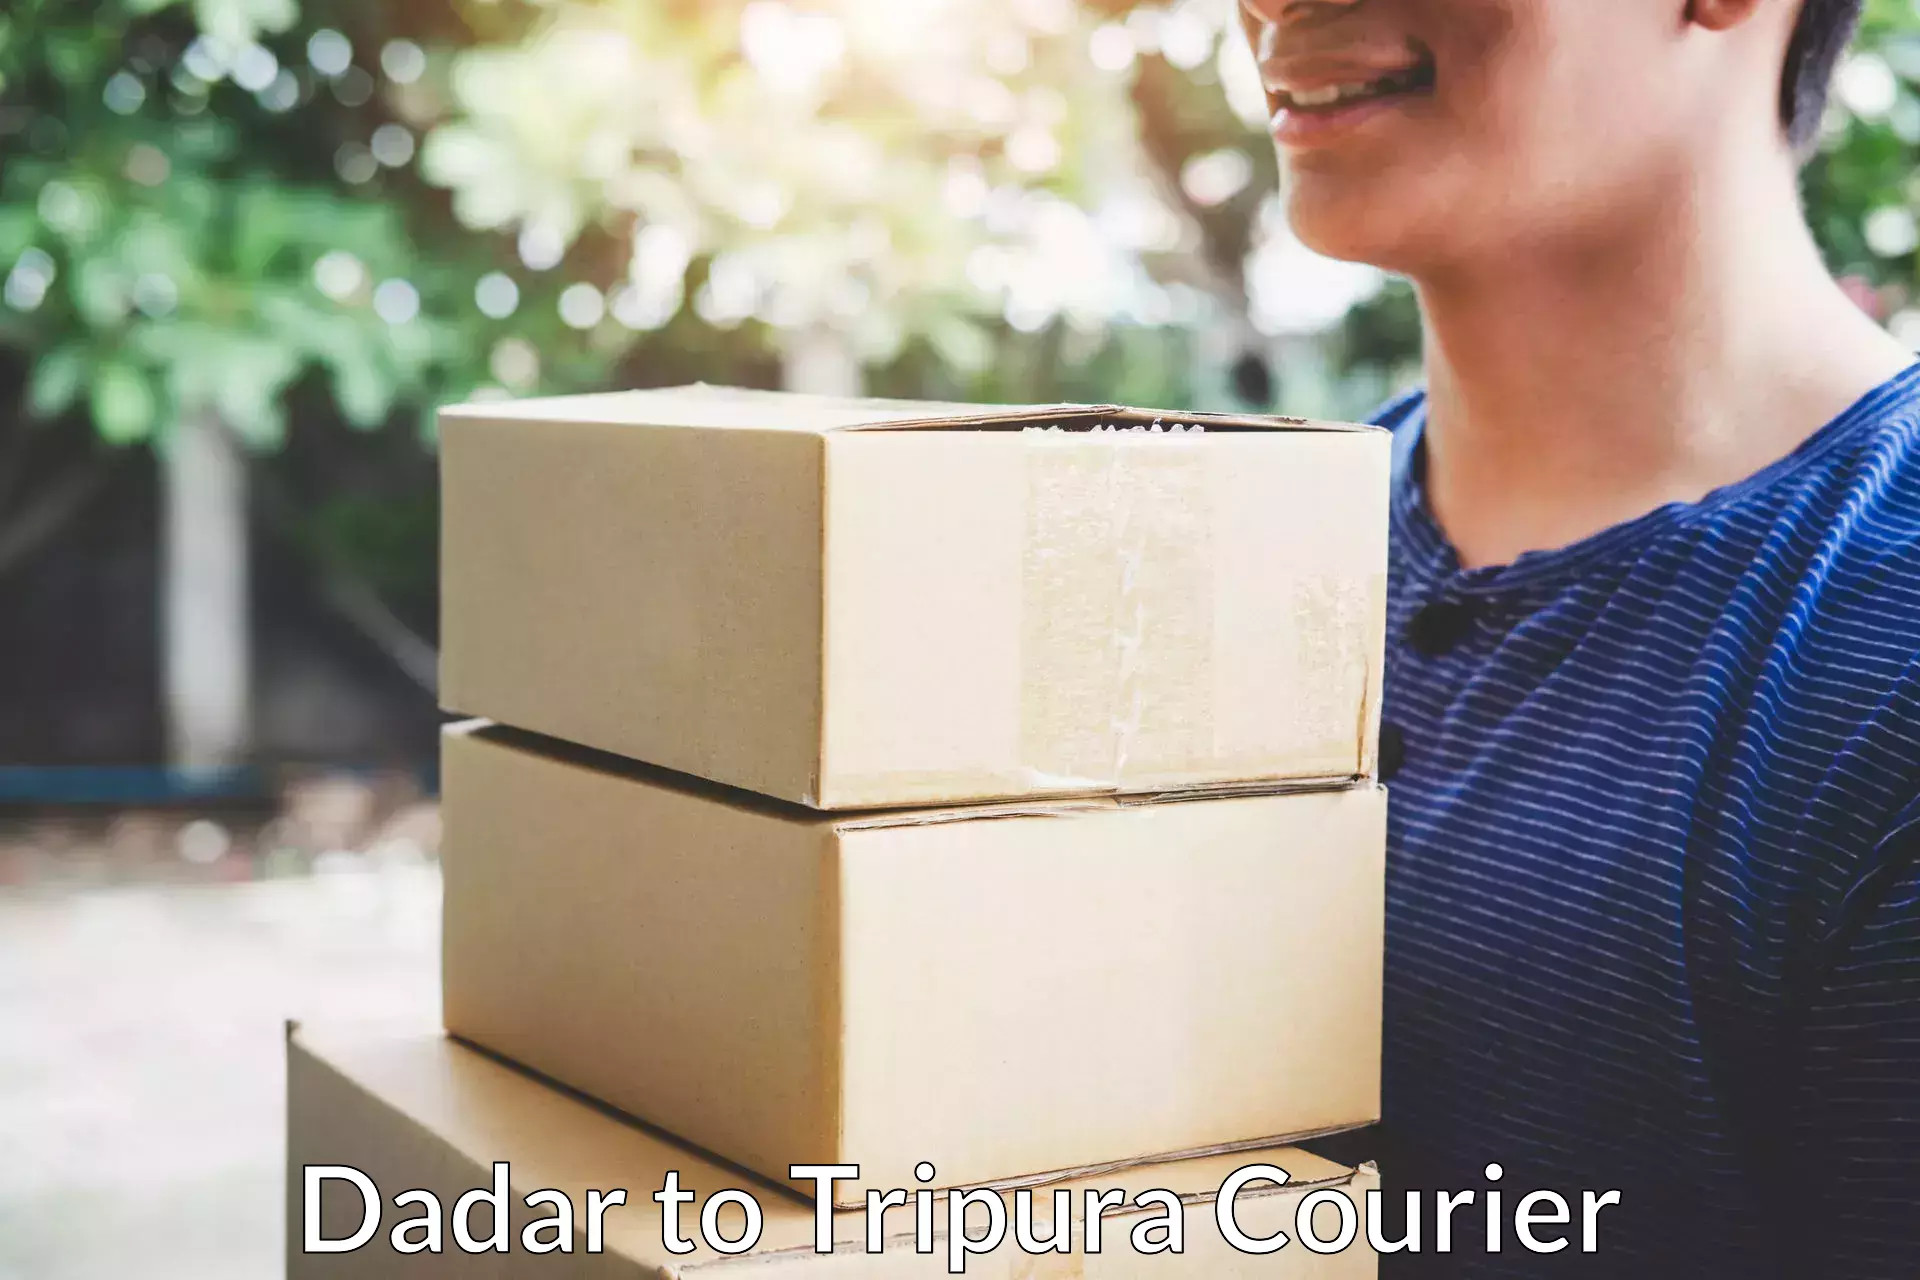 Furniture delivery service Dadar to Dhalai